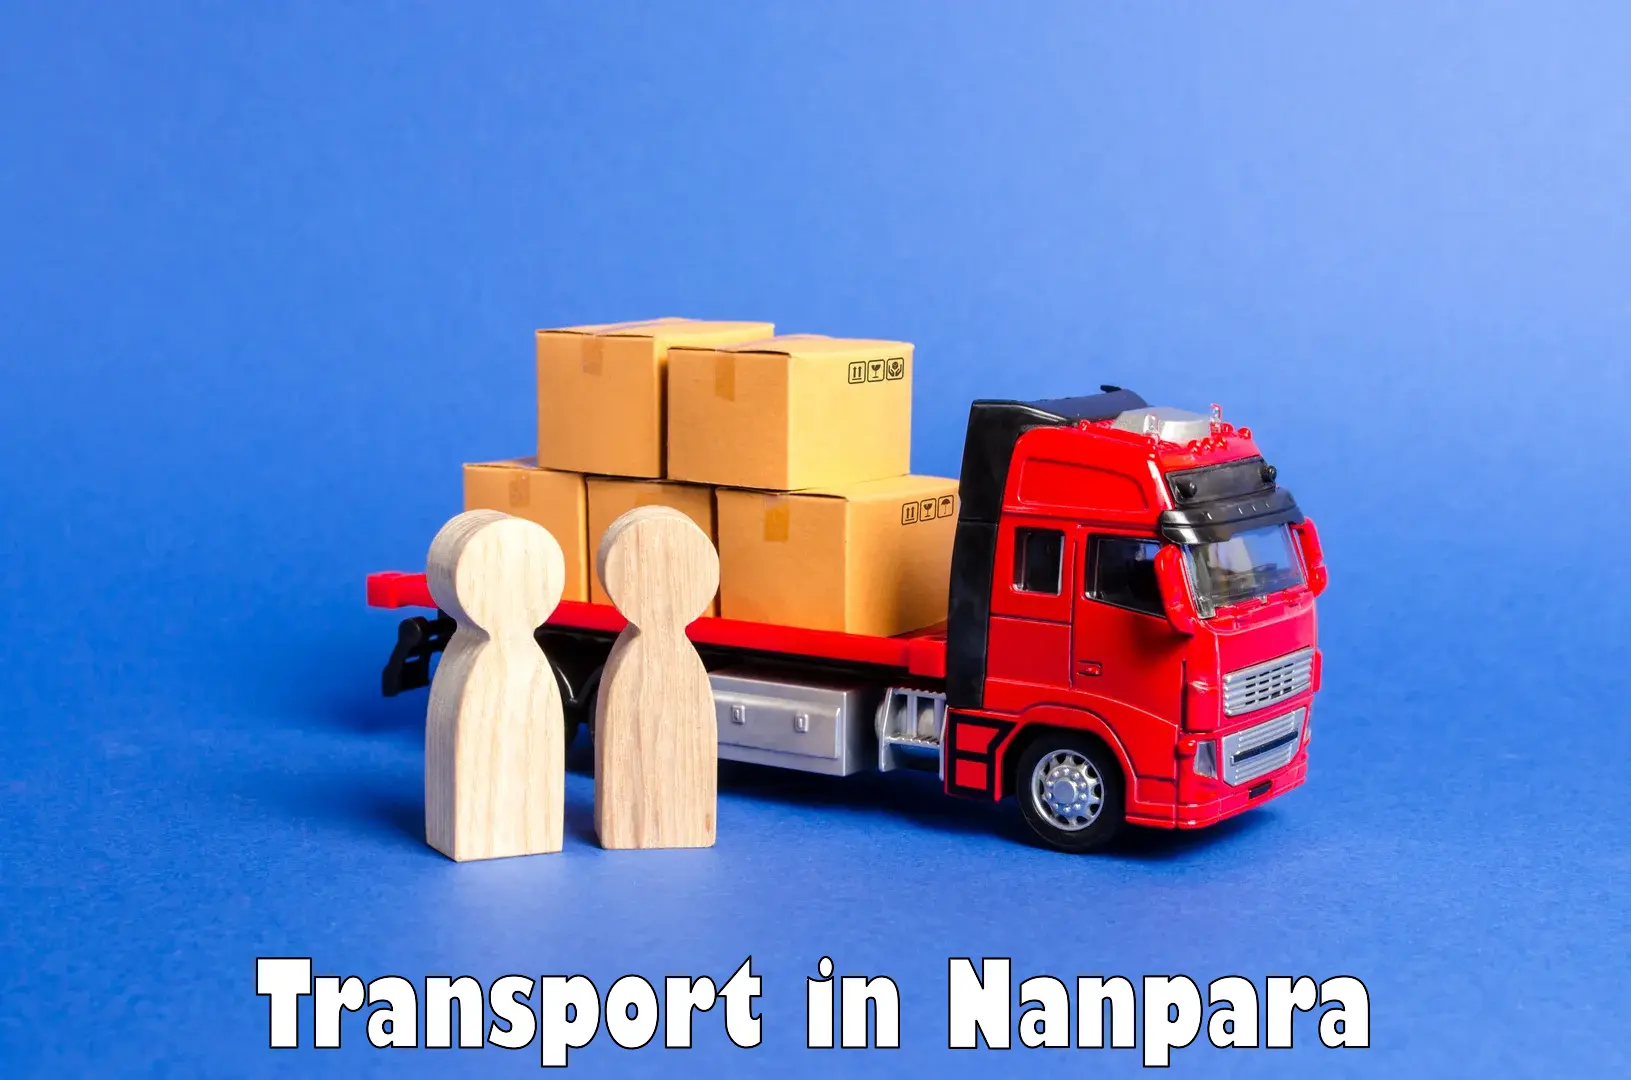 Cargo transport services in Nanpara